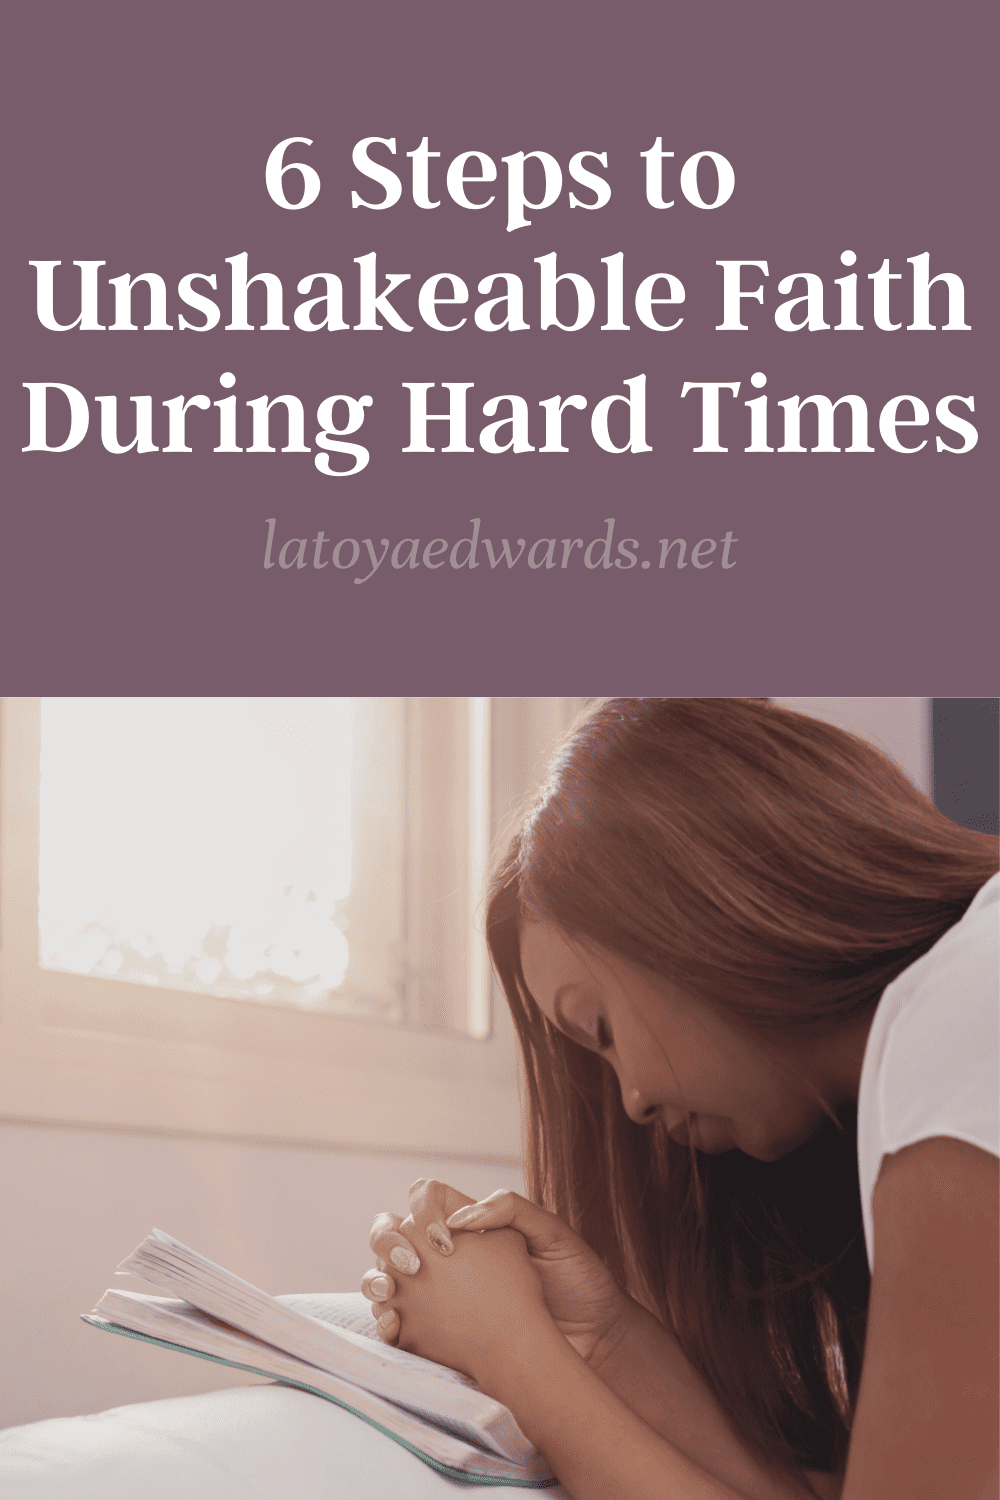 Building strong faith is key to learning to trust God during hard times but it's also not always easy. When lifet gets tough it's important to grow closer to God as you wait on his timing and plans. Listen in to learn the 6 steps of the roadmap that can help you find peace, hope and strength as you learn to endure.